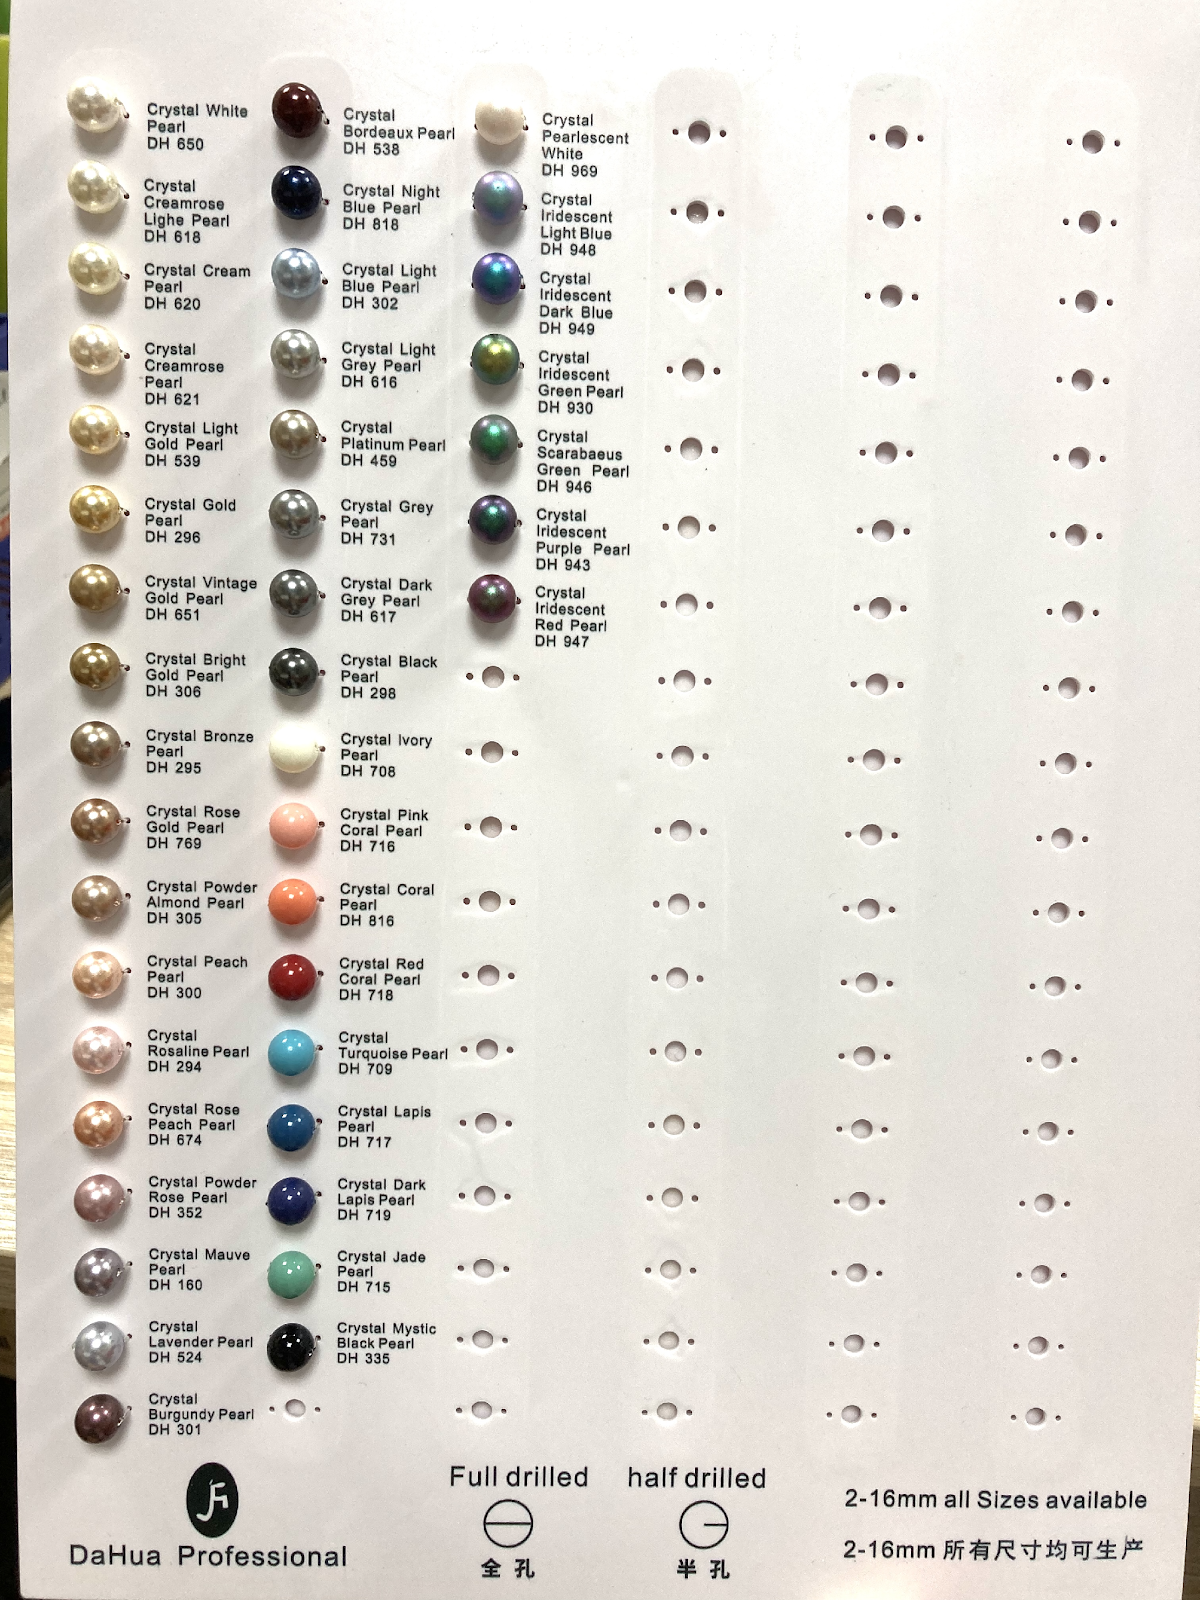 GLASS PEARL COLOR CHART